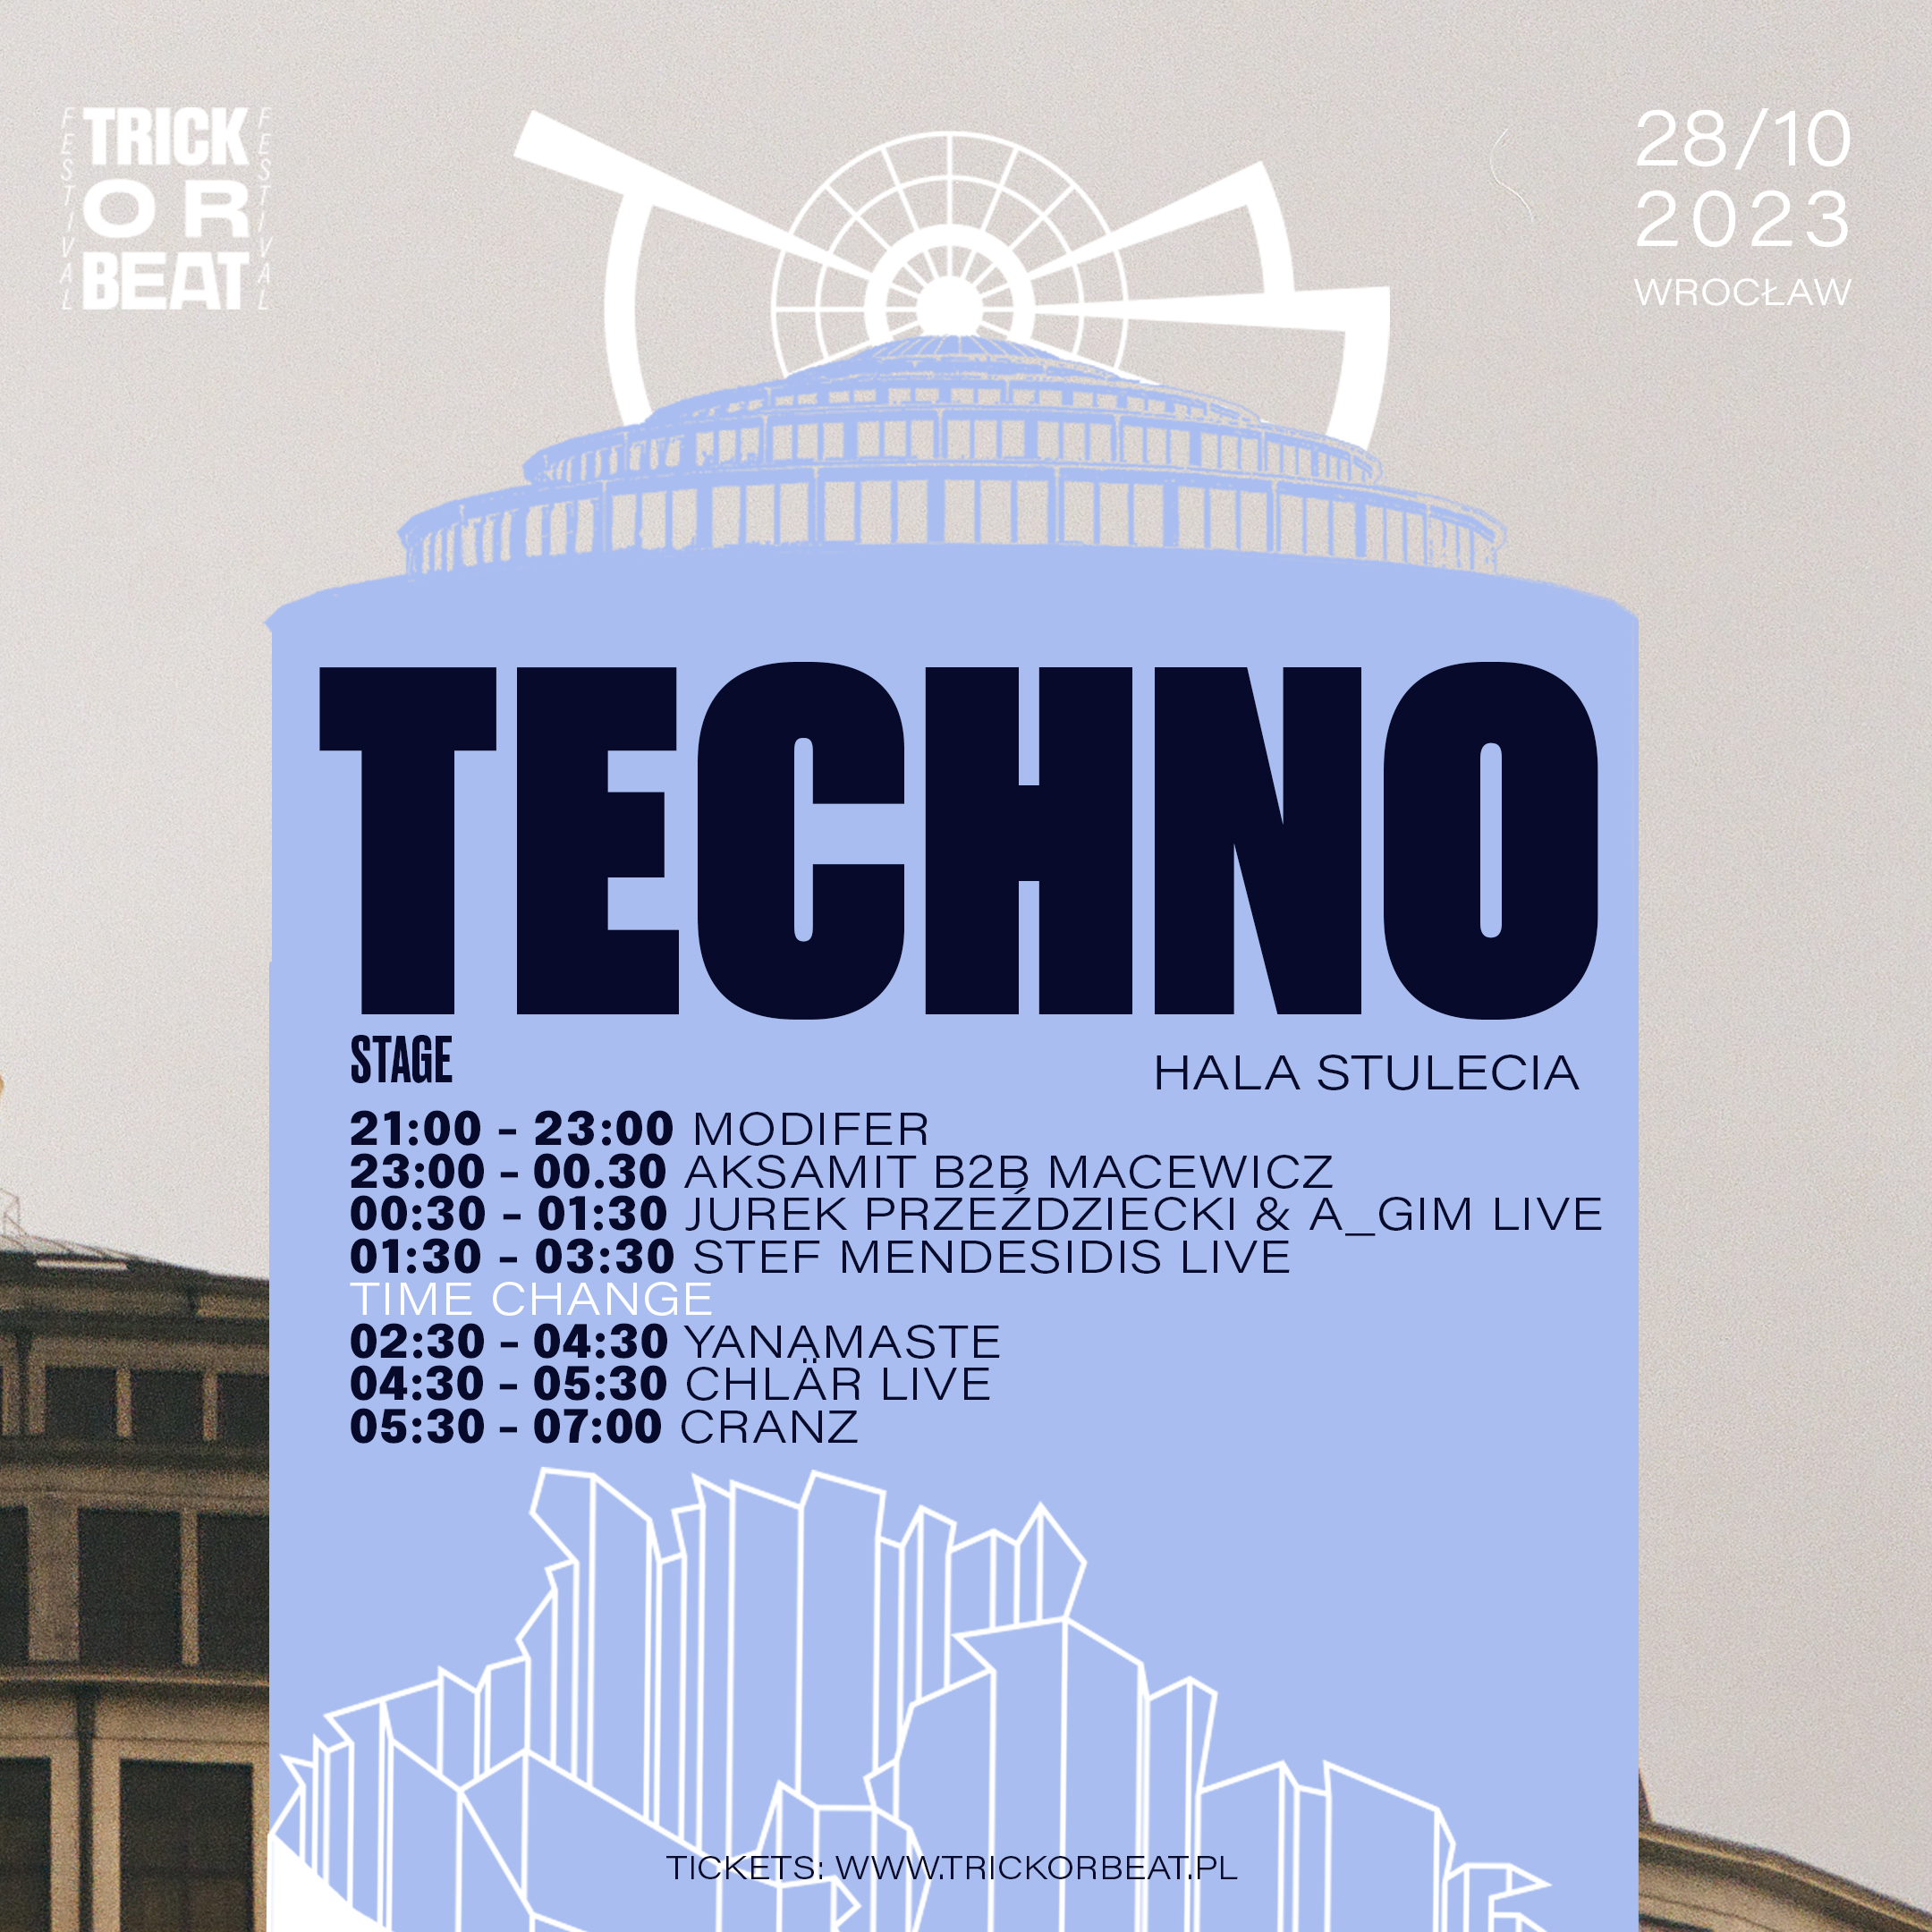 Trick-or-Beat-2023-Techno-Stage-Timeline